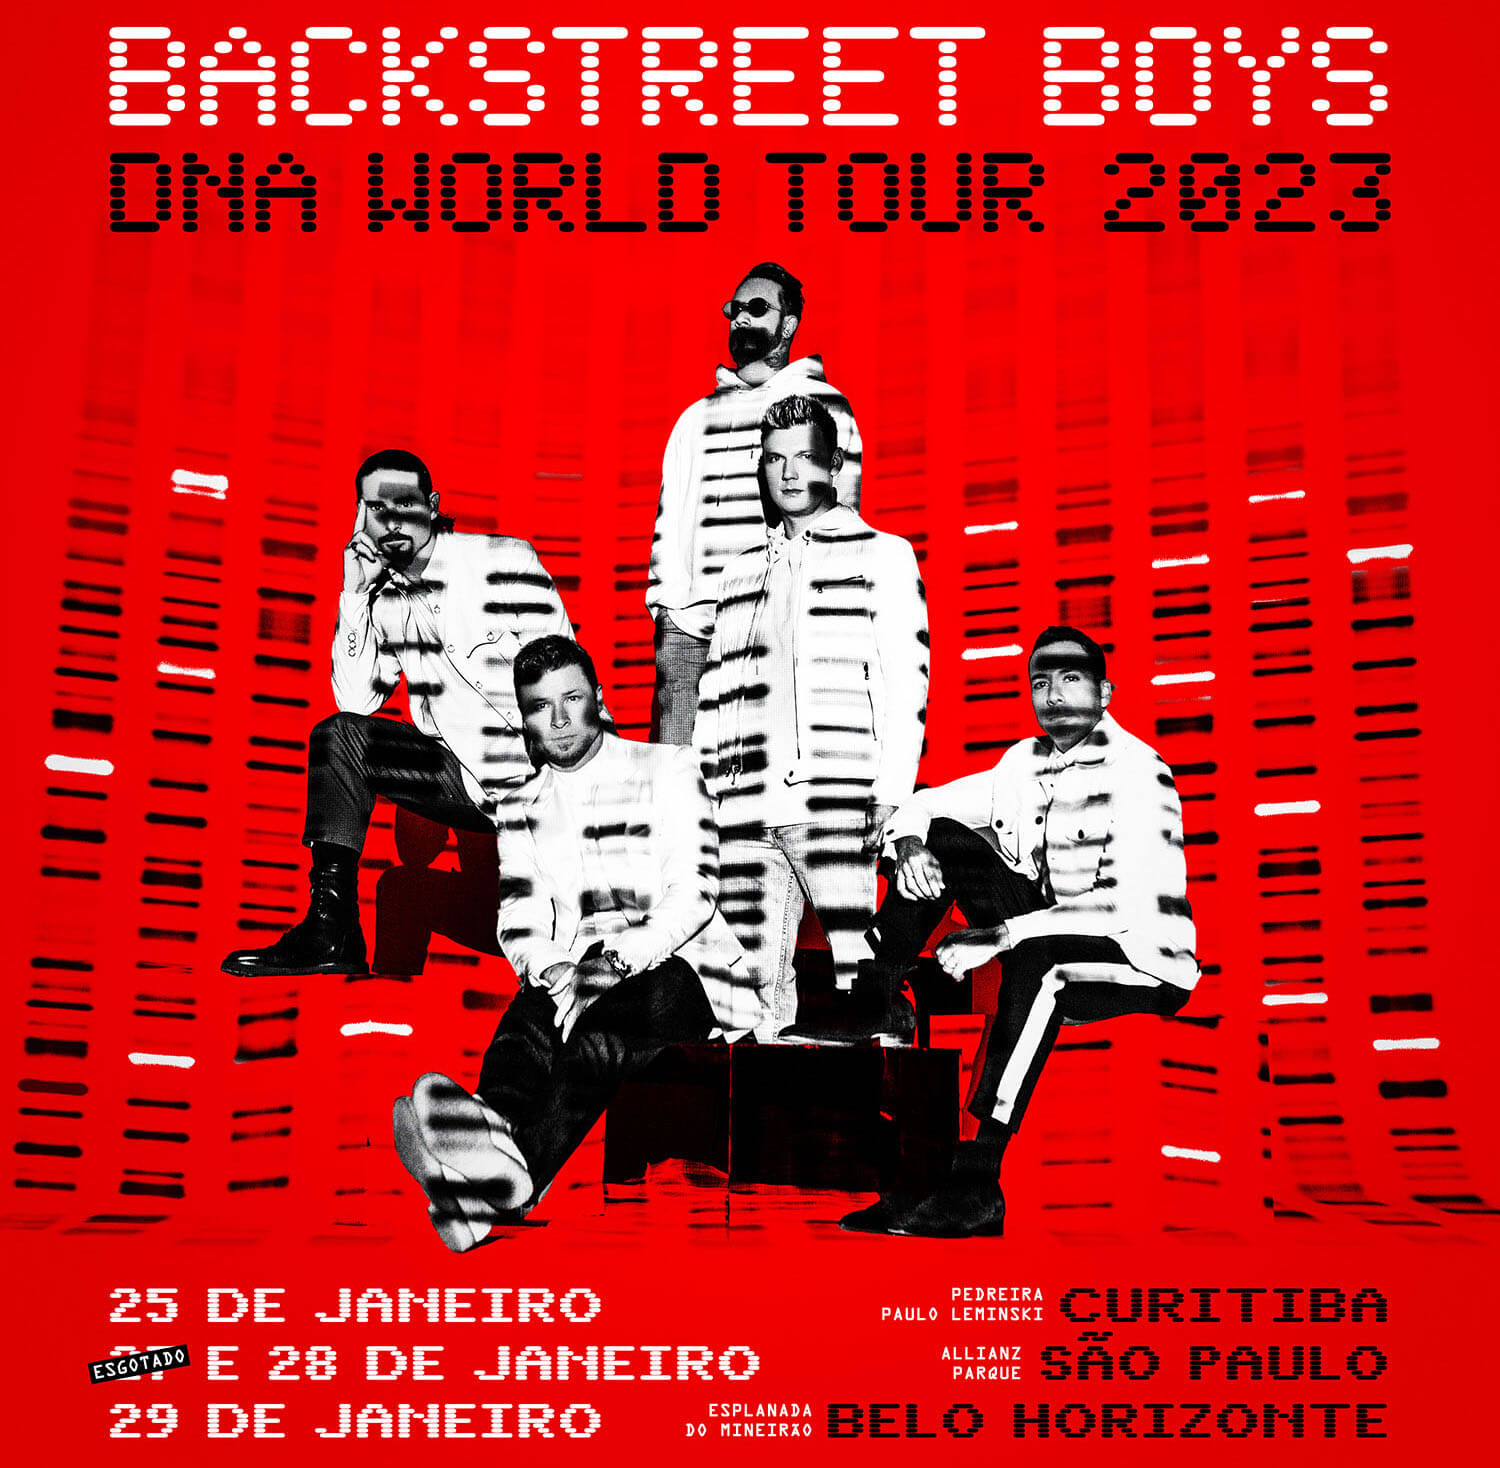 JUST ANNOUNCED: 3 DNA World Tour Dates Added in Brazil